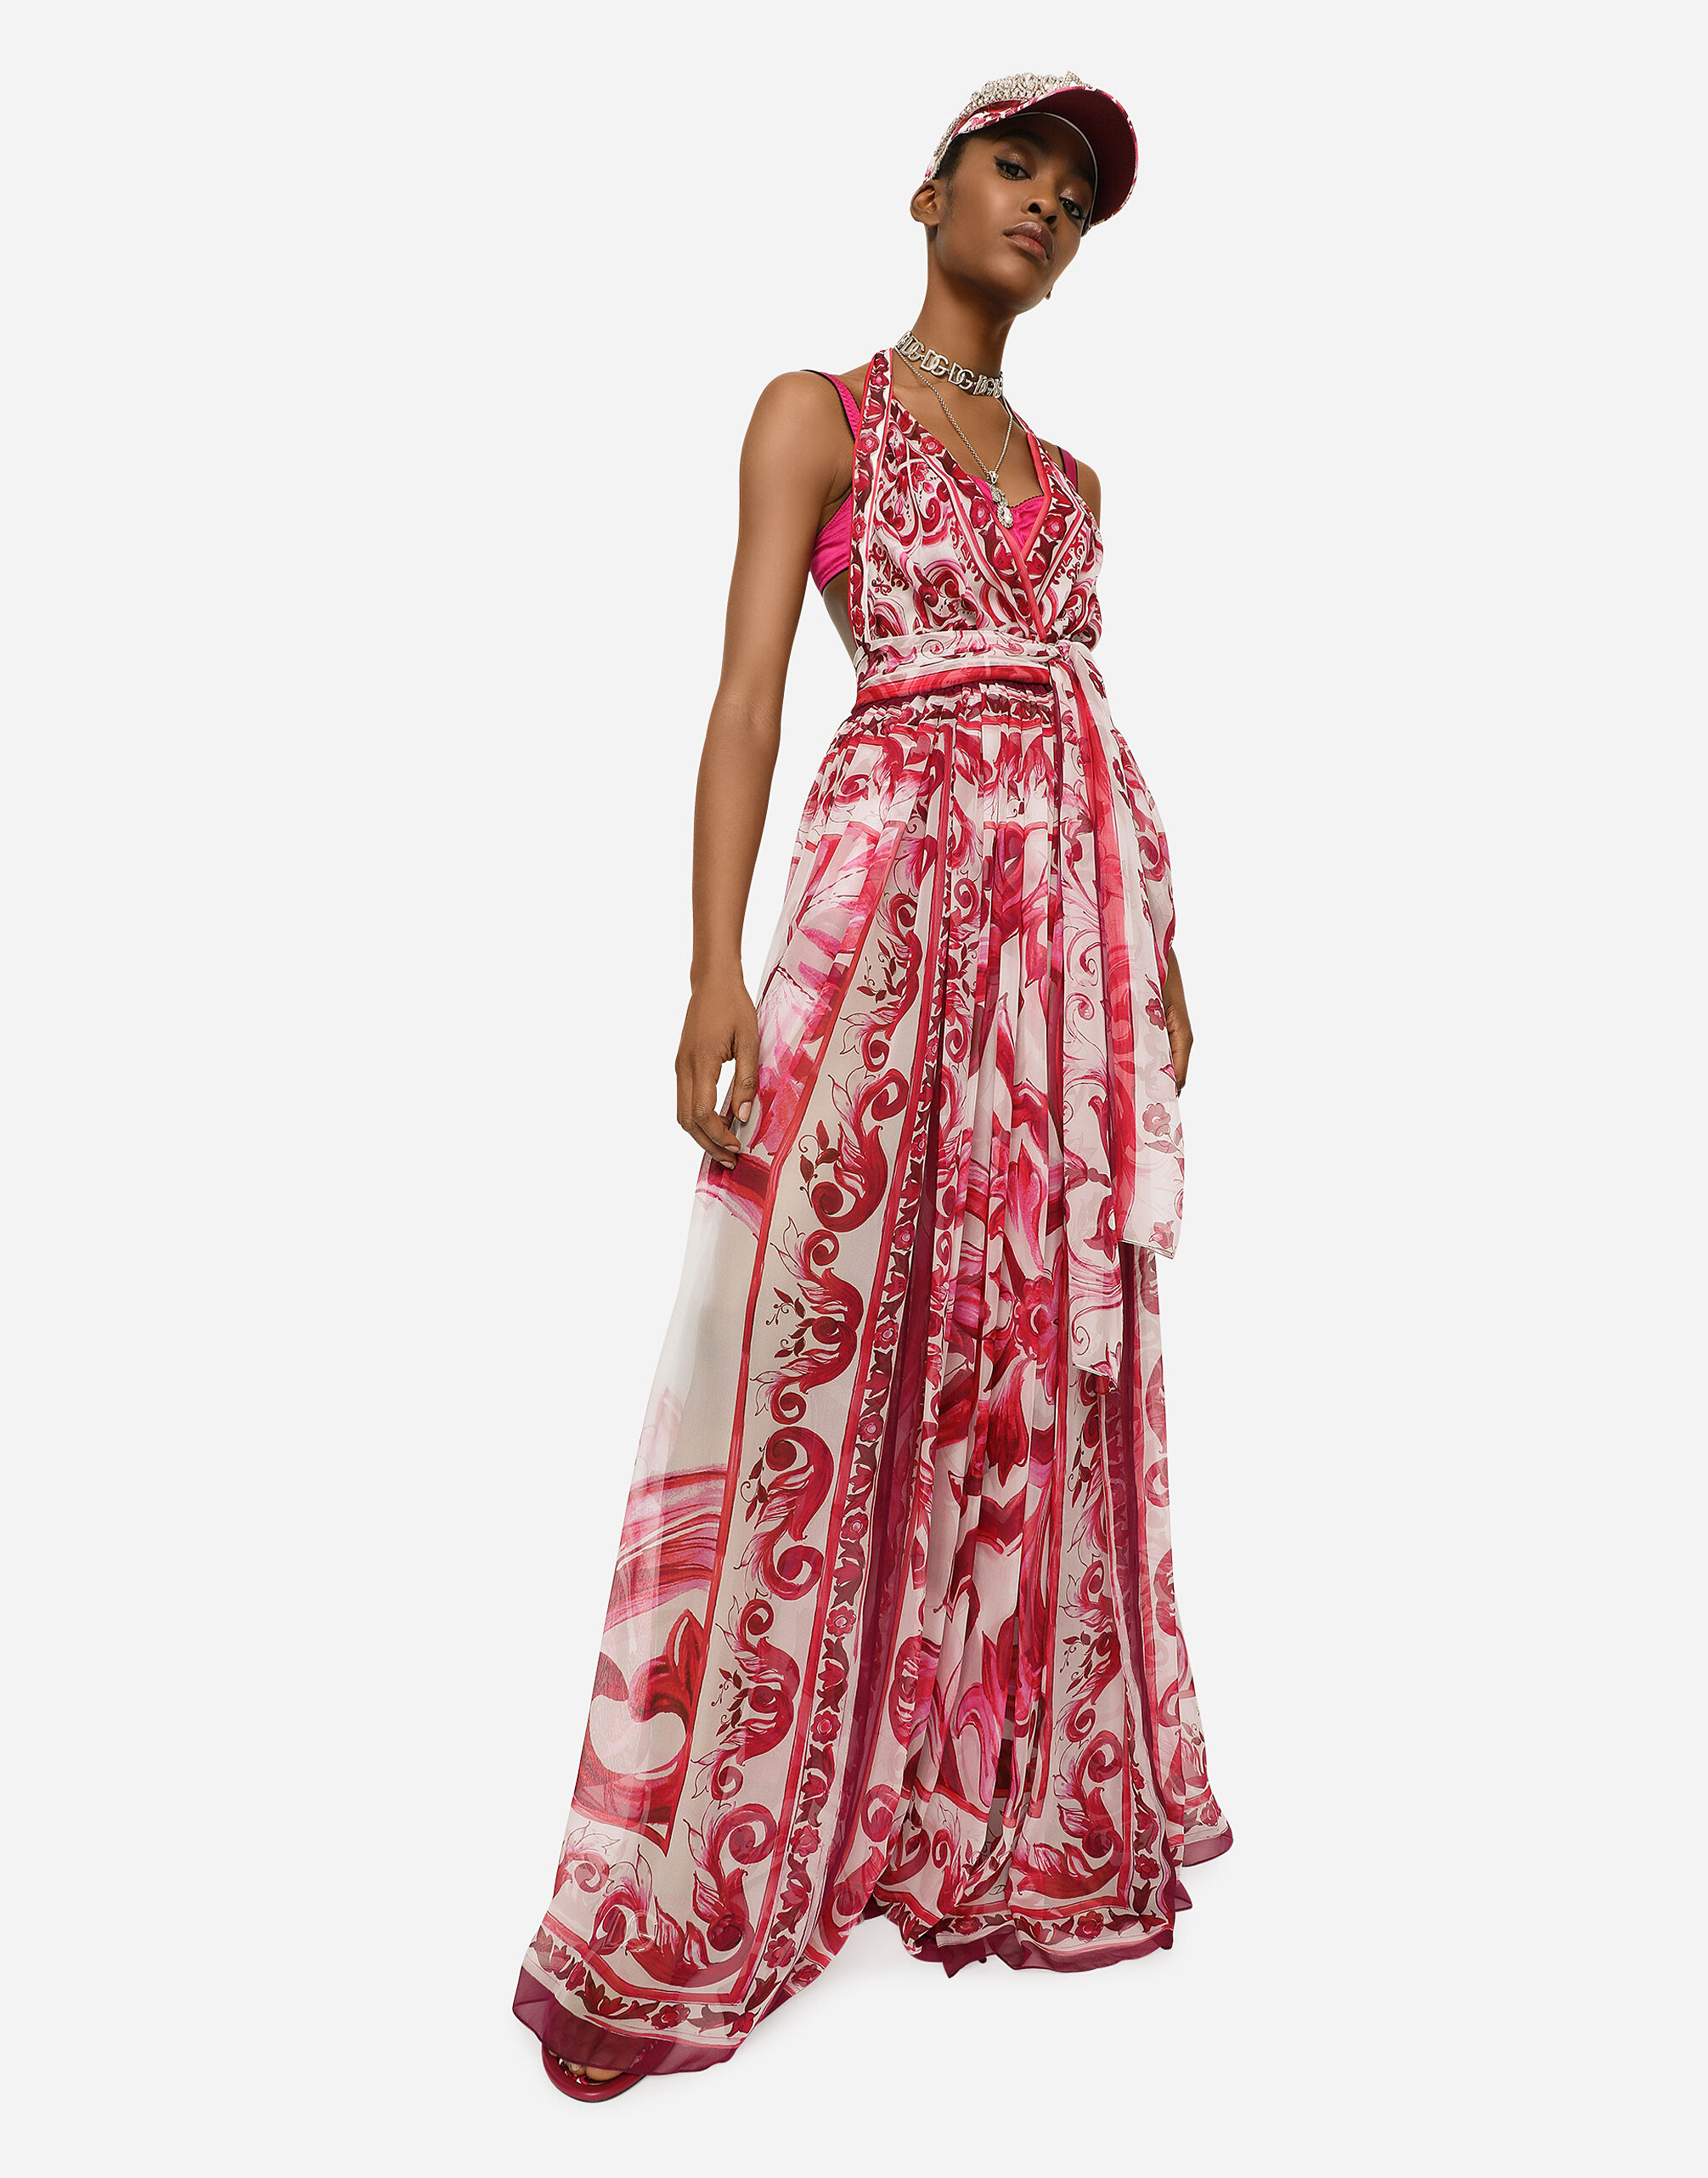 ERDEM Ruffled pleated tiered floral-print chiffon gown | NET-A-PORTER